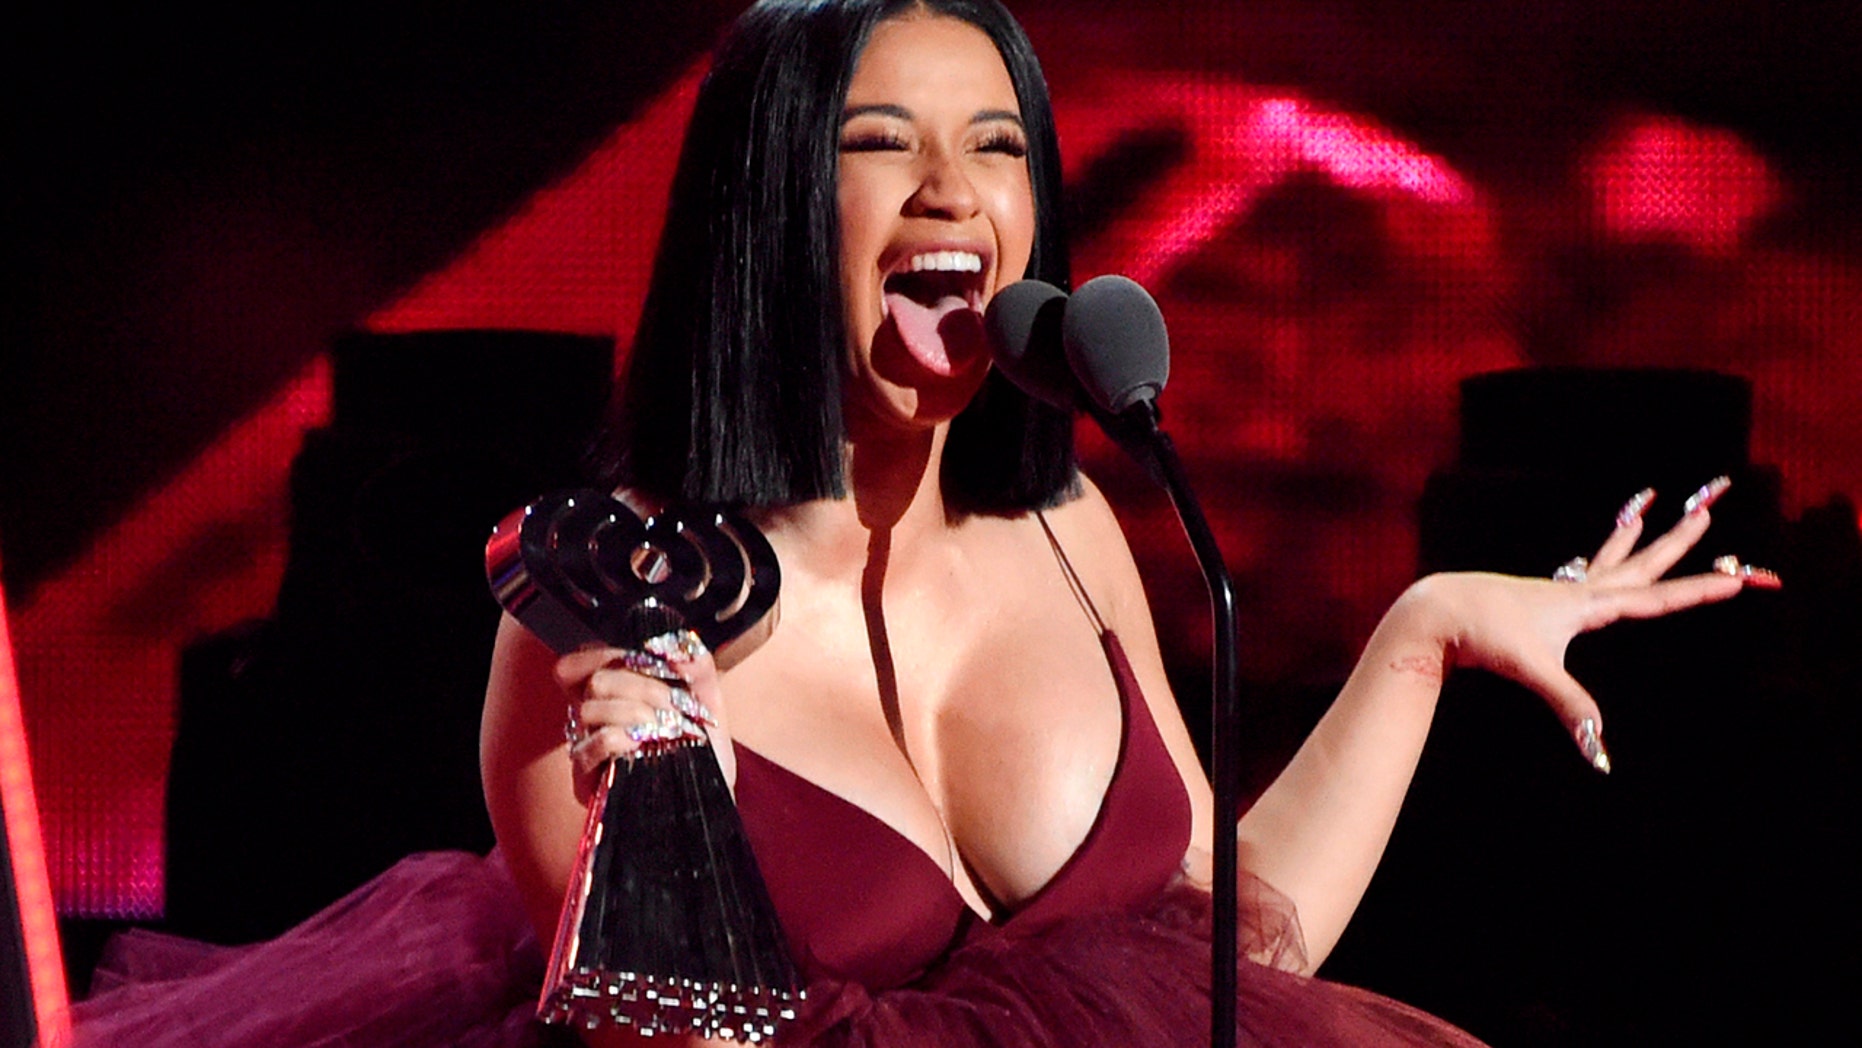 Cardi B leads iHeartRadio Awards with 13 nods, Drake scores 8